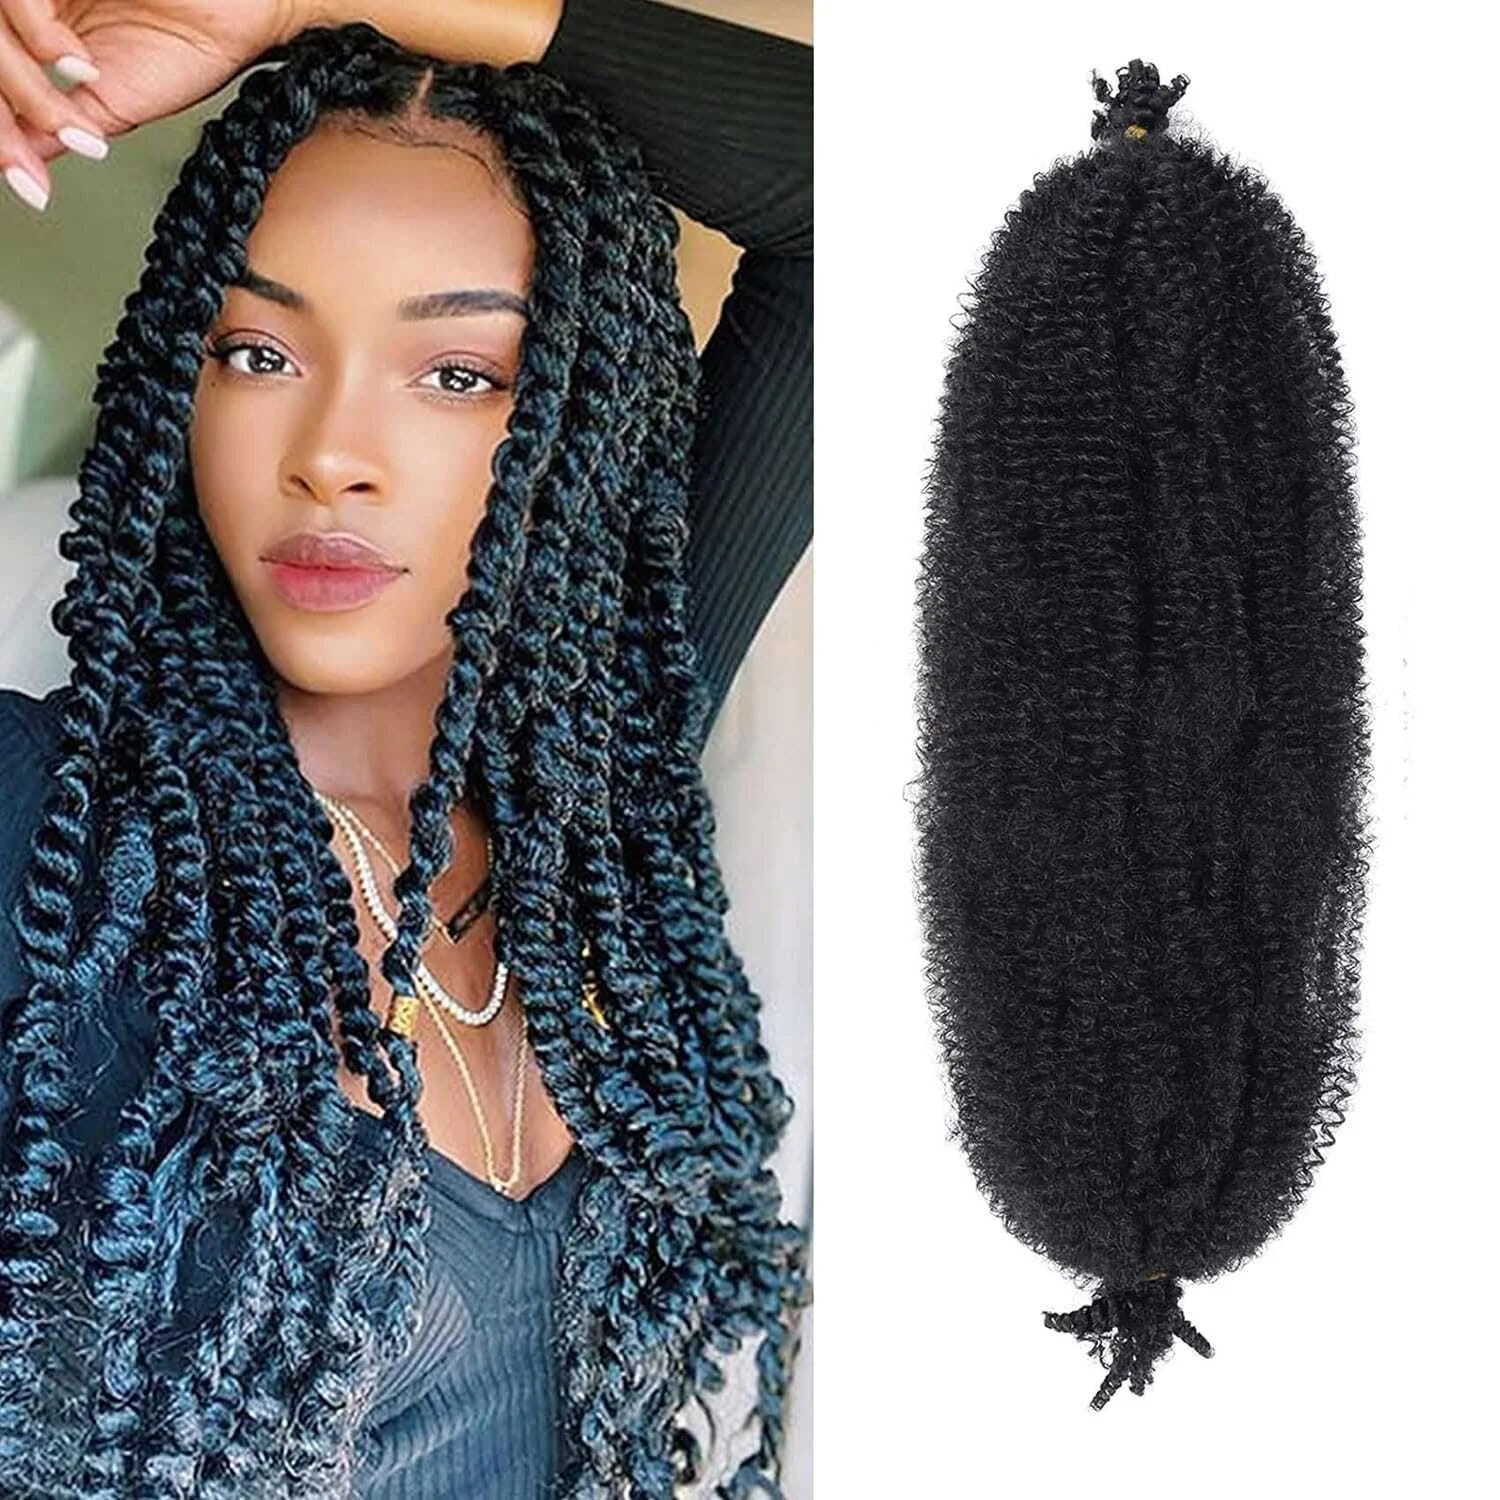 Short Afro Kinky Twist Braids Crochet Hair 16 24Inch Marley Braids Synthetic Hair Extensions For African Women Hair